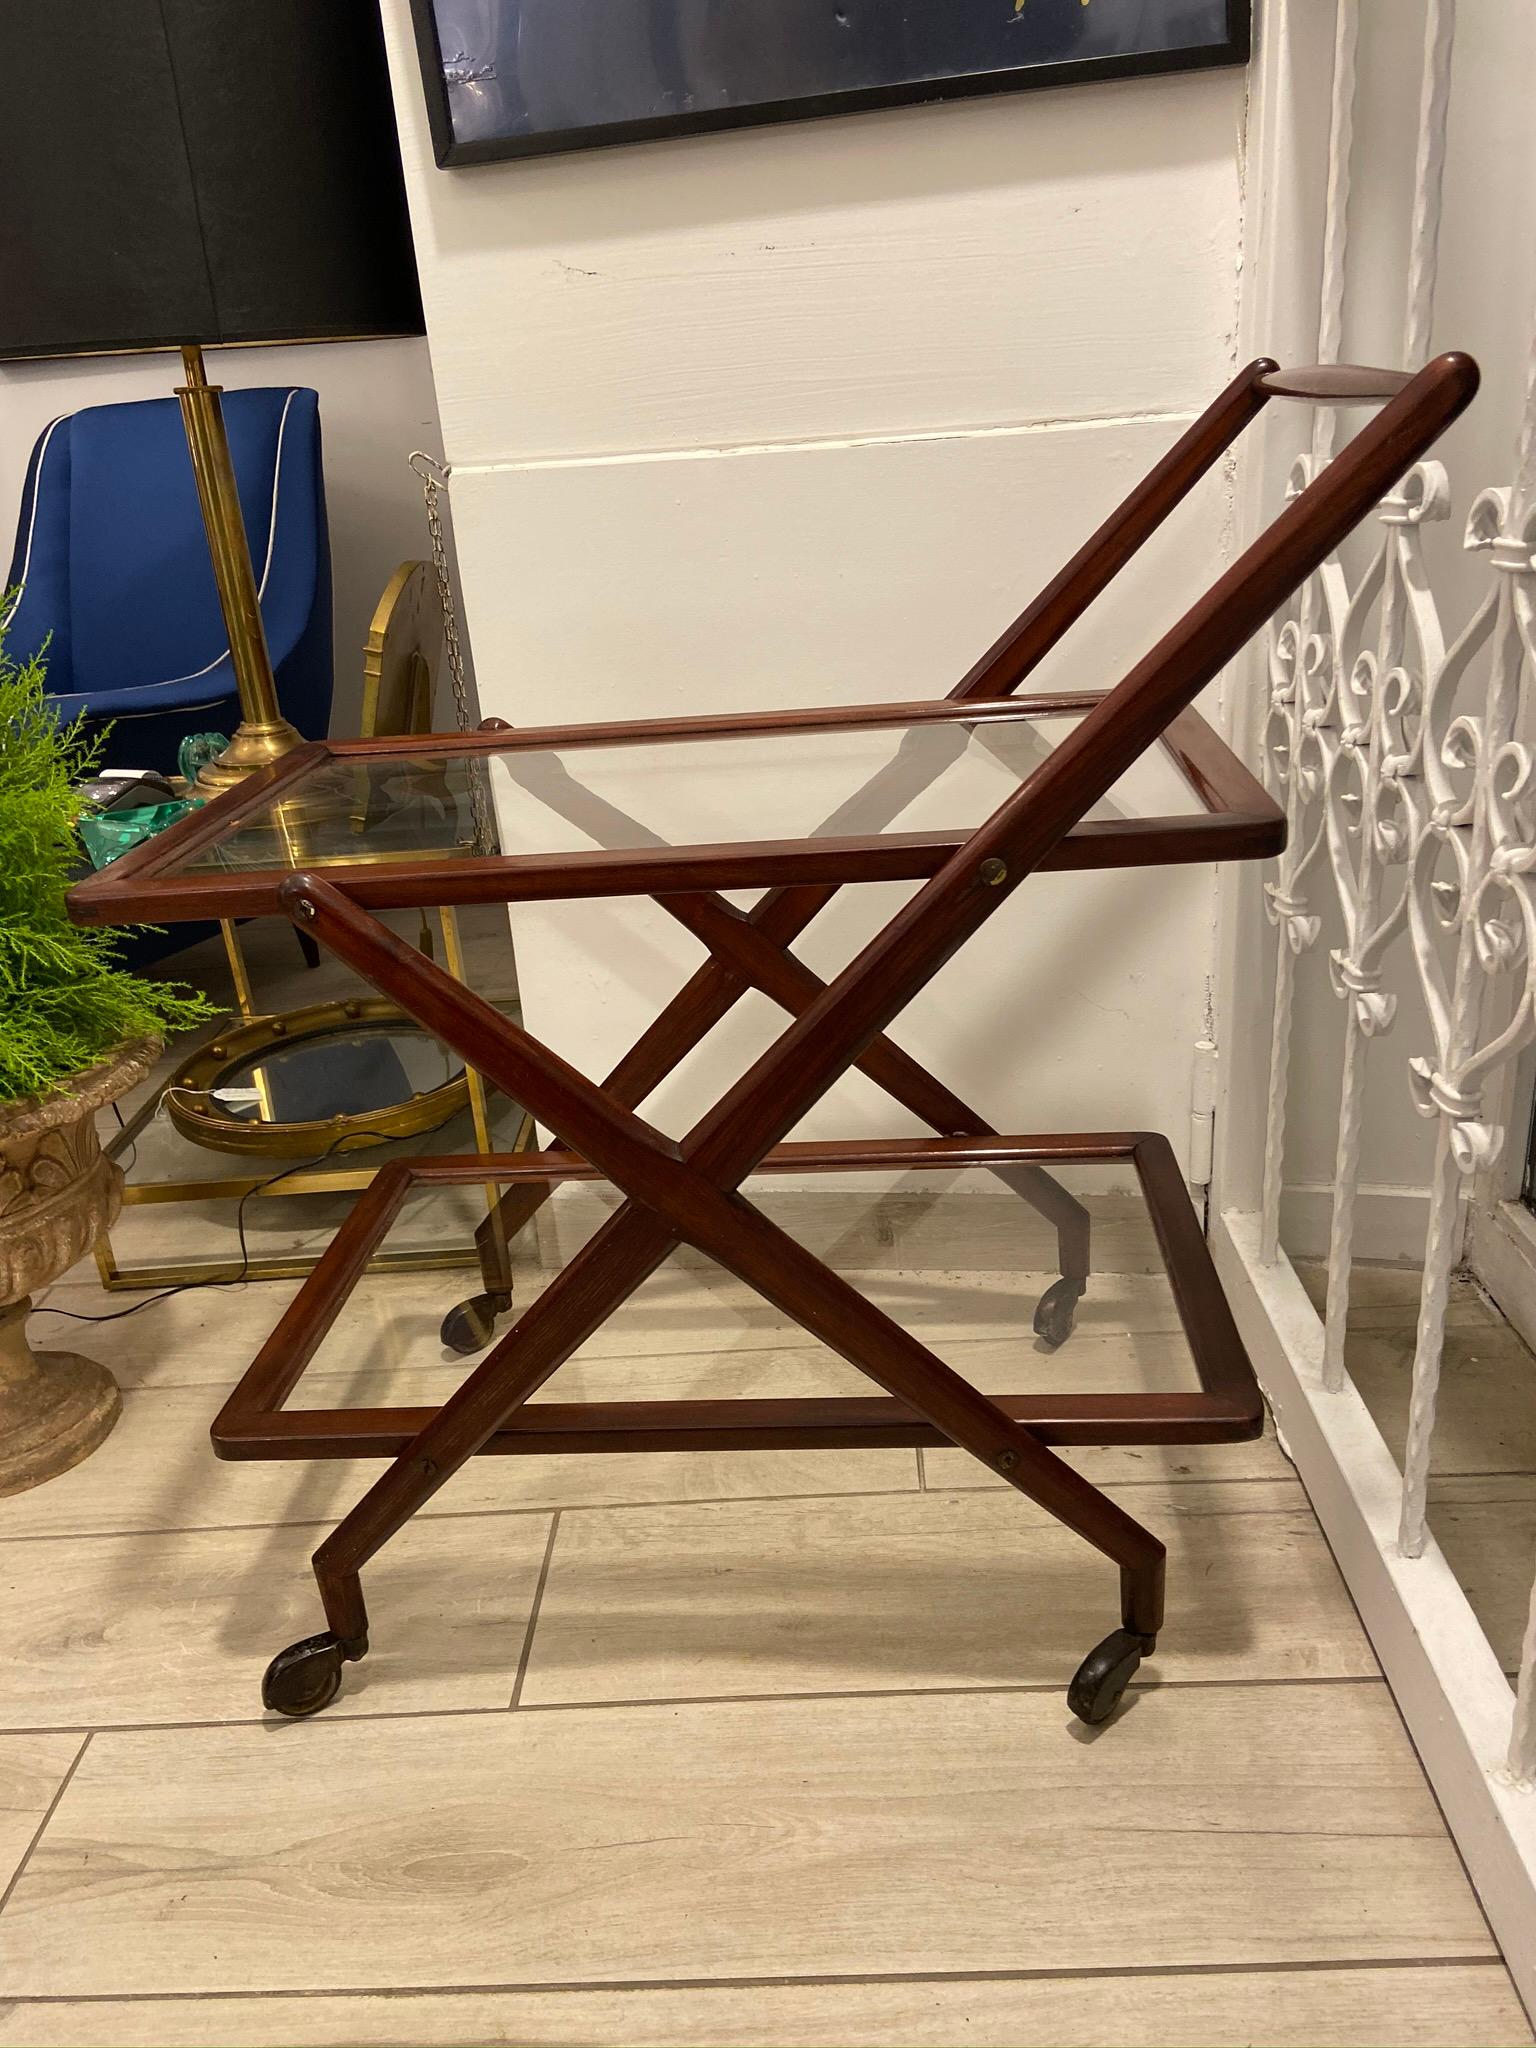 Mahogany Mid-Century Modern bar cart, in the manner of Italian designer Ico Parisi, 1960s. The sculptural bar cart features two glass shelves.